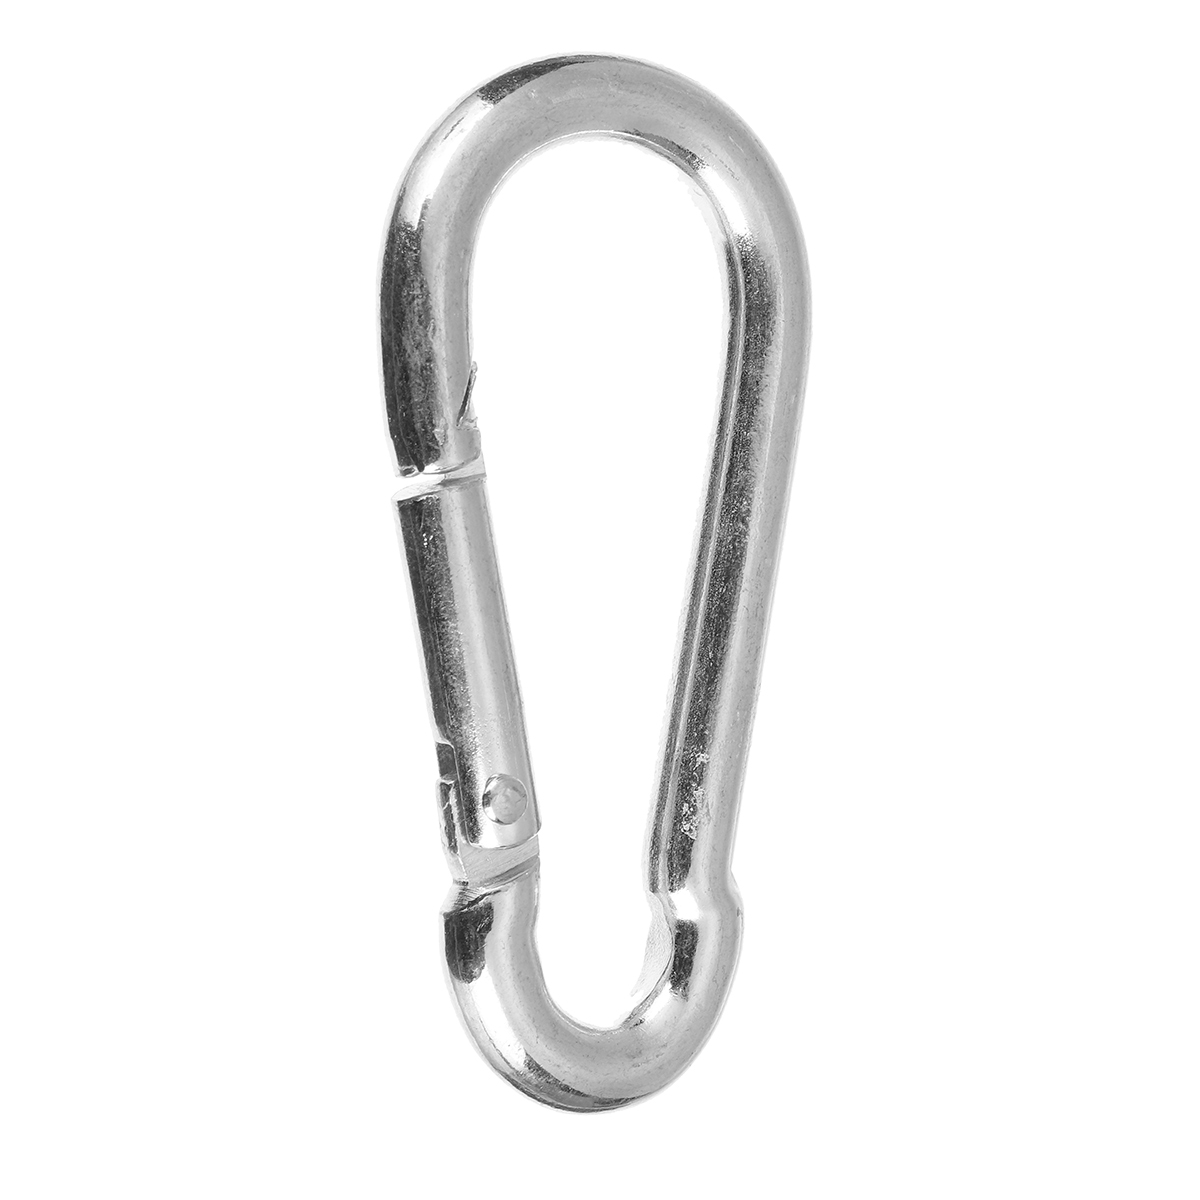 330LB-Hammock-Chair-Hanging-Accessories-Stainless-Steel-Swivell-Hook-Ceiling-1758255-9